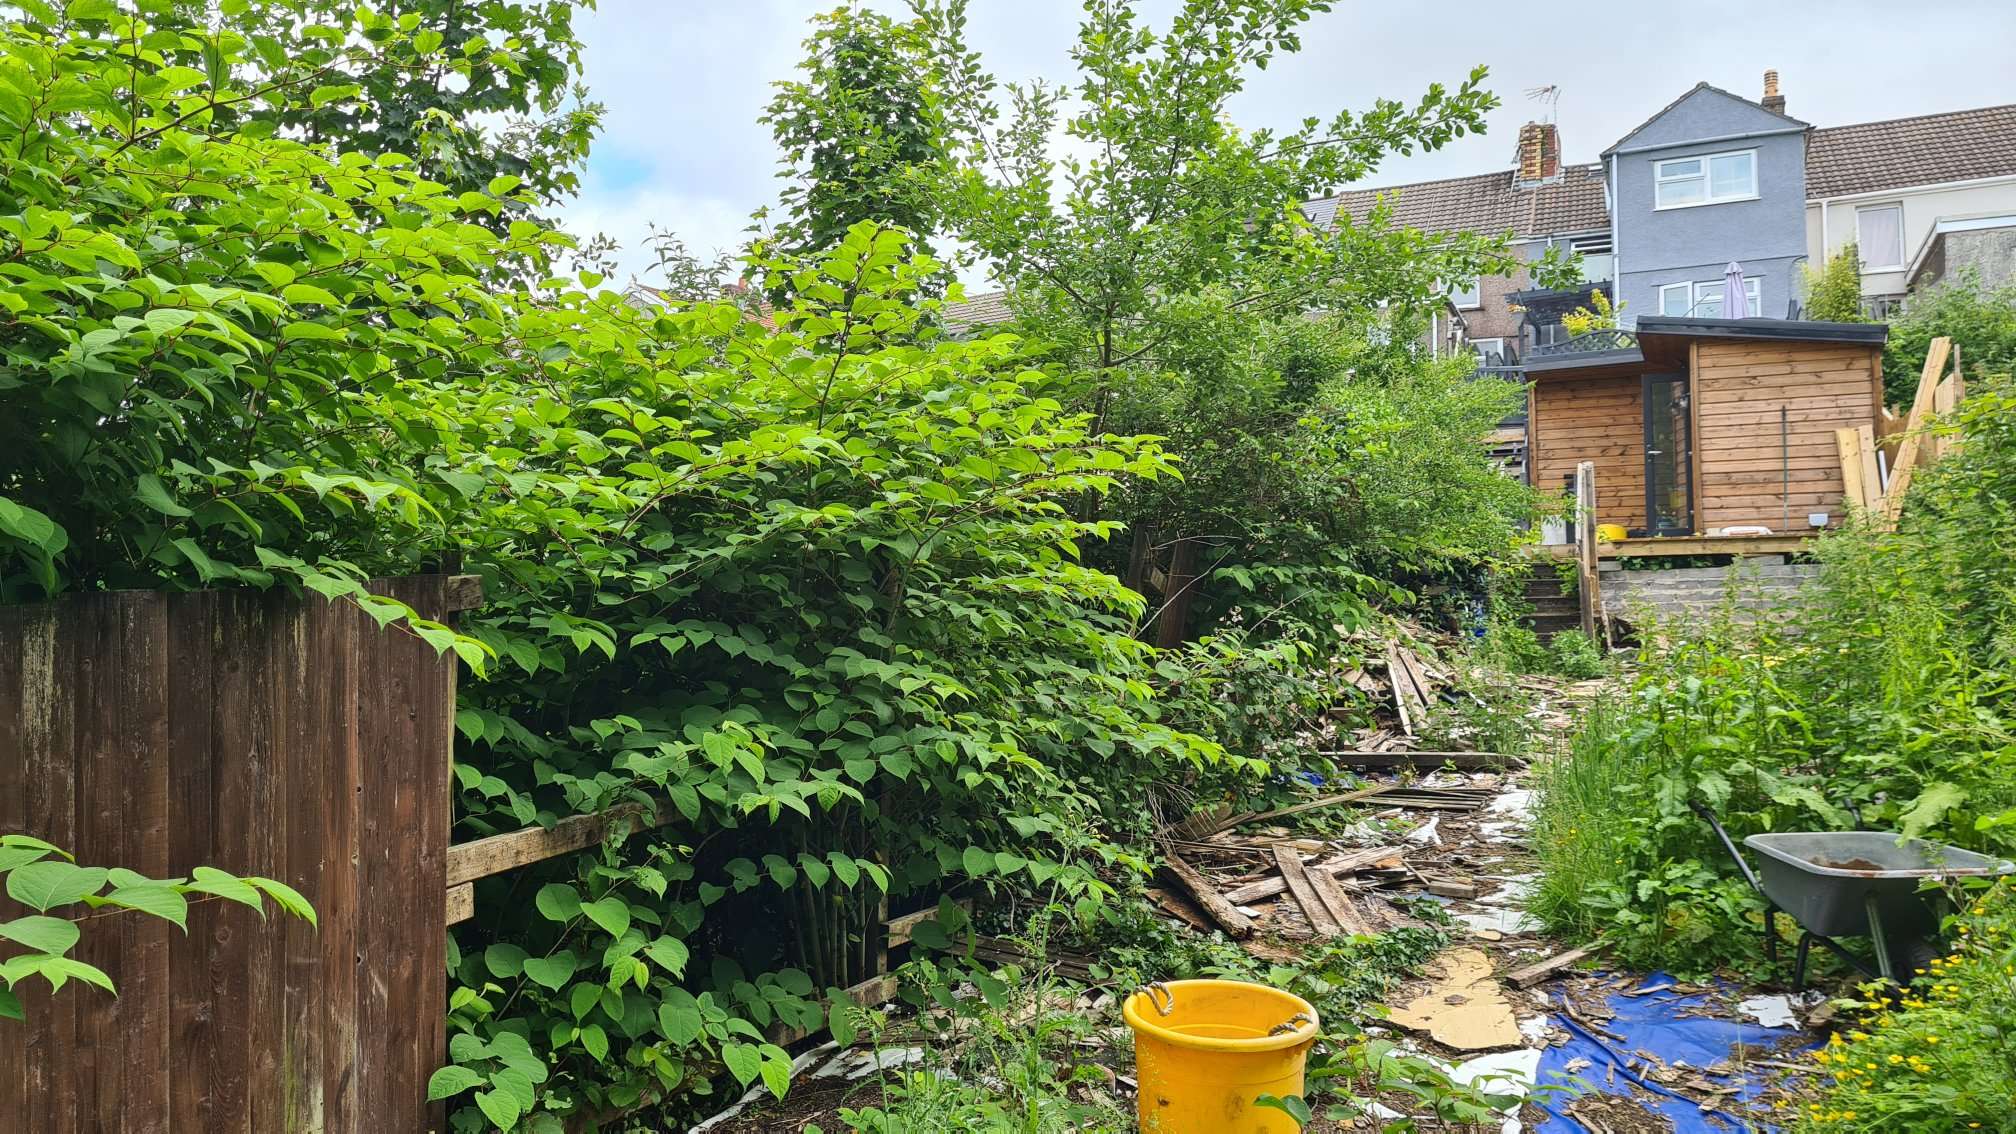 It's always best to disclose Japanese knotweed on your property